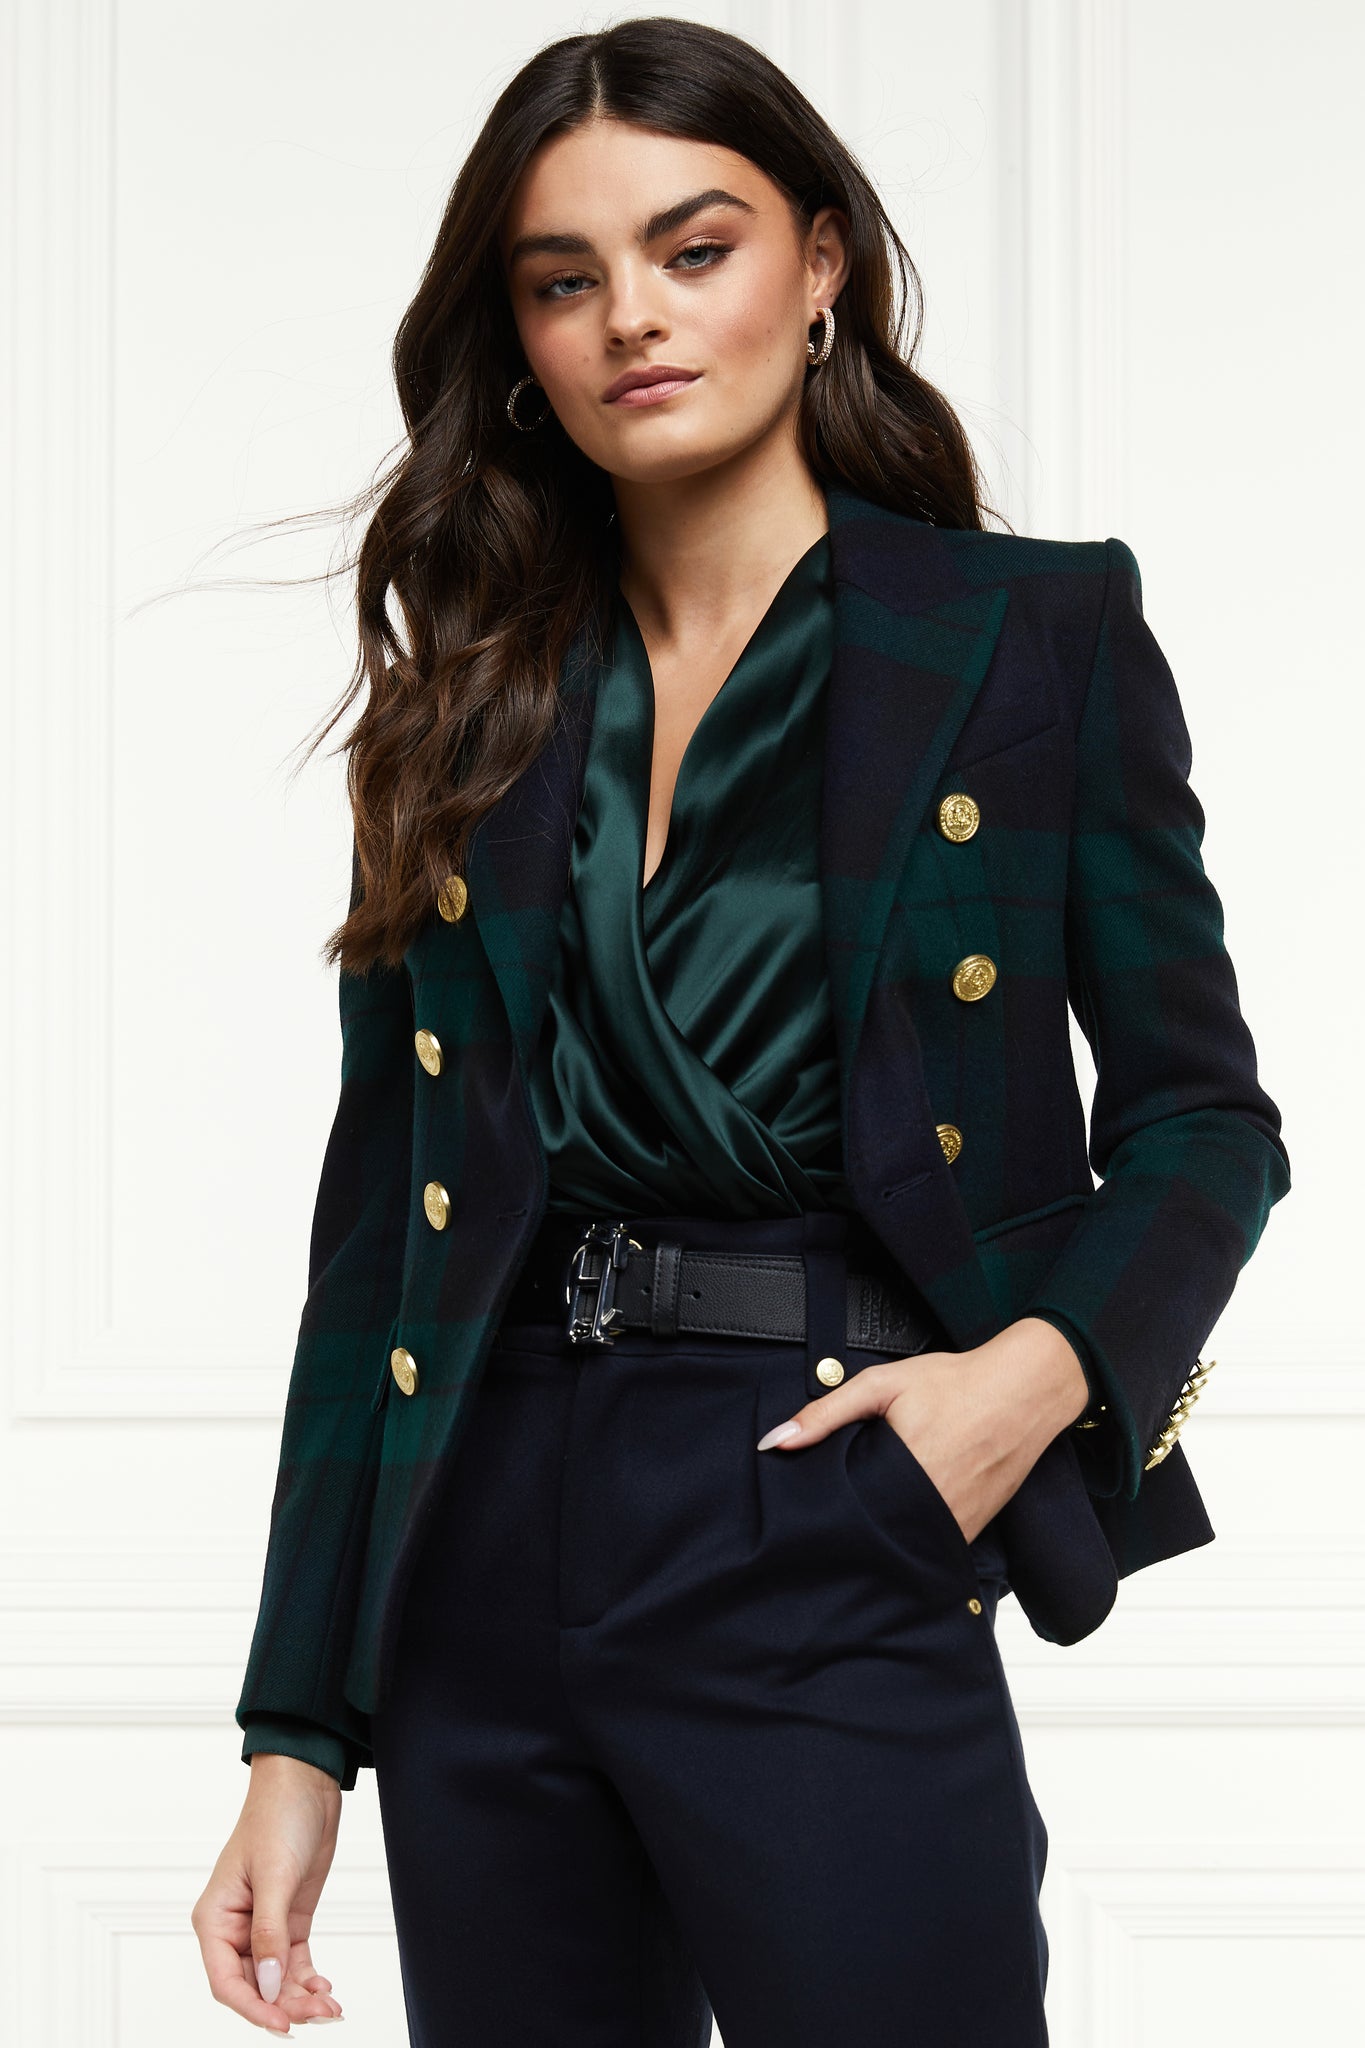 British made double breasted blazer that fastens with a single button hole to create a more form fitting silhouette with two pockets and gold button detailing this blazer is made from navy and green blackwatch tartan